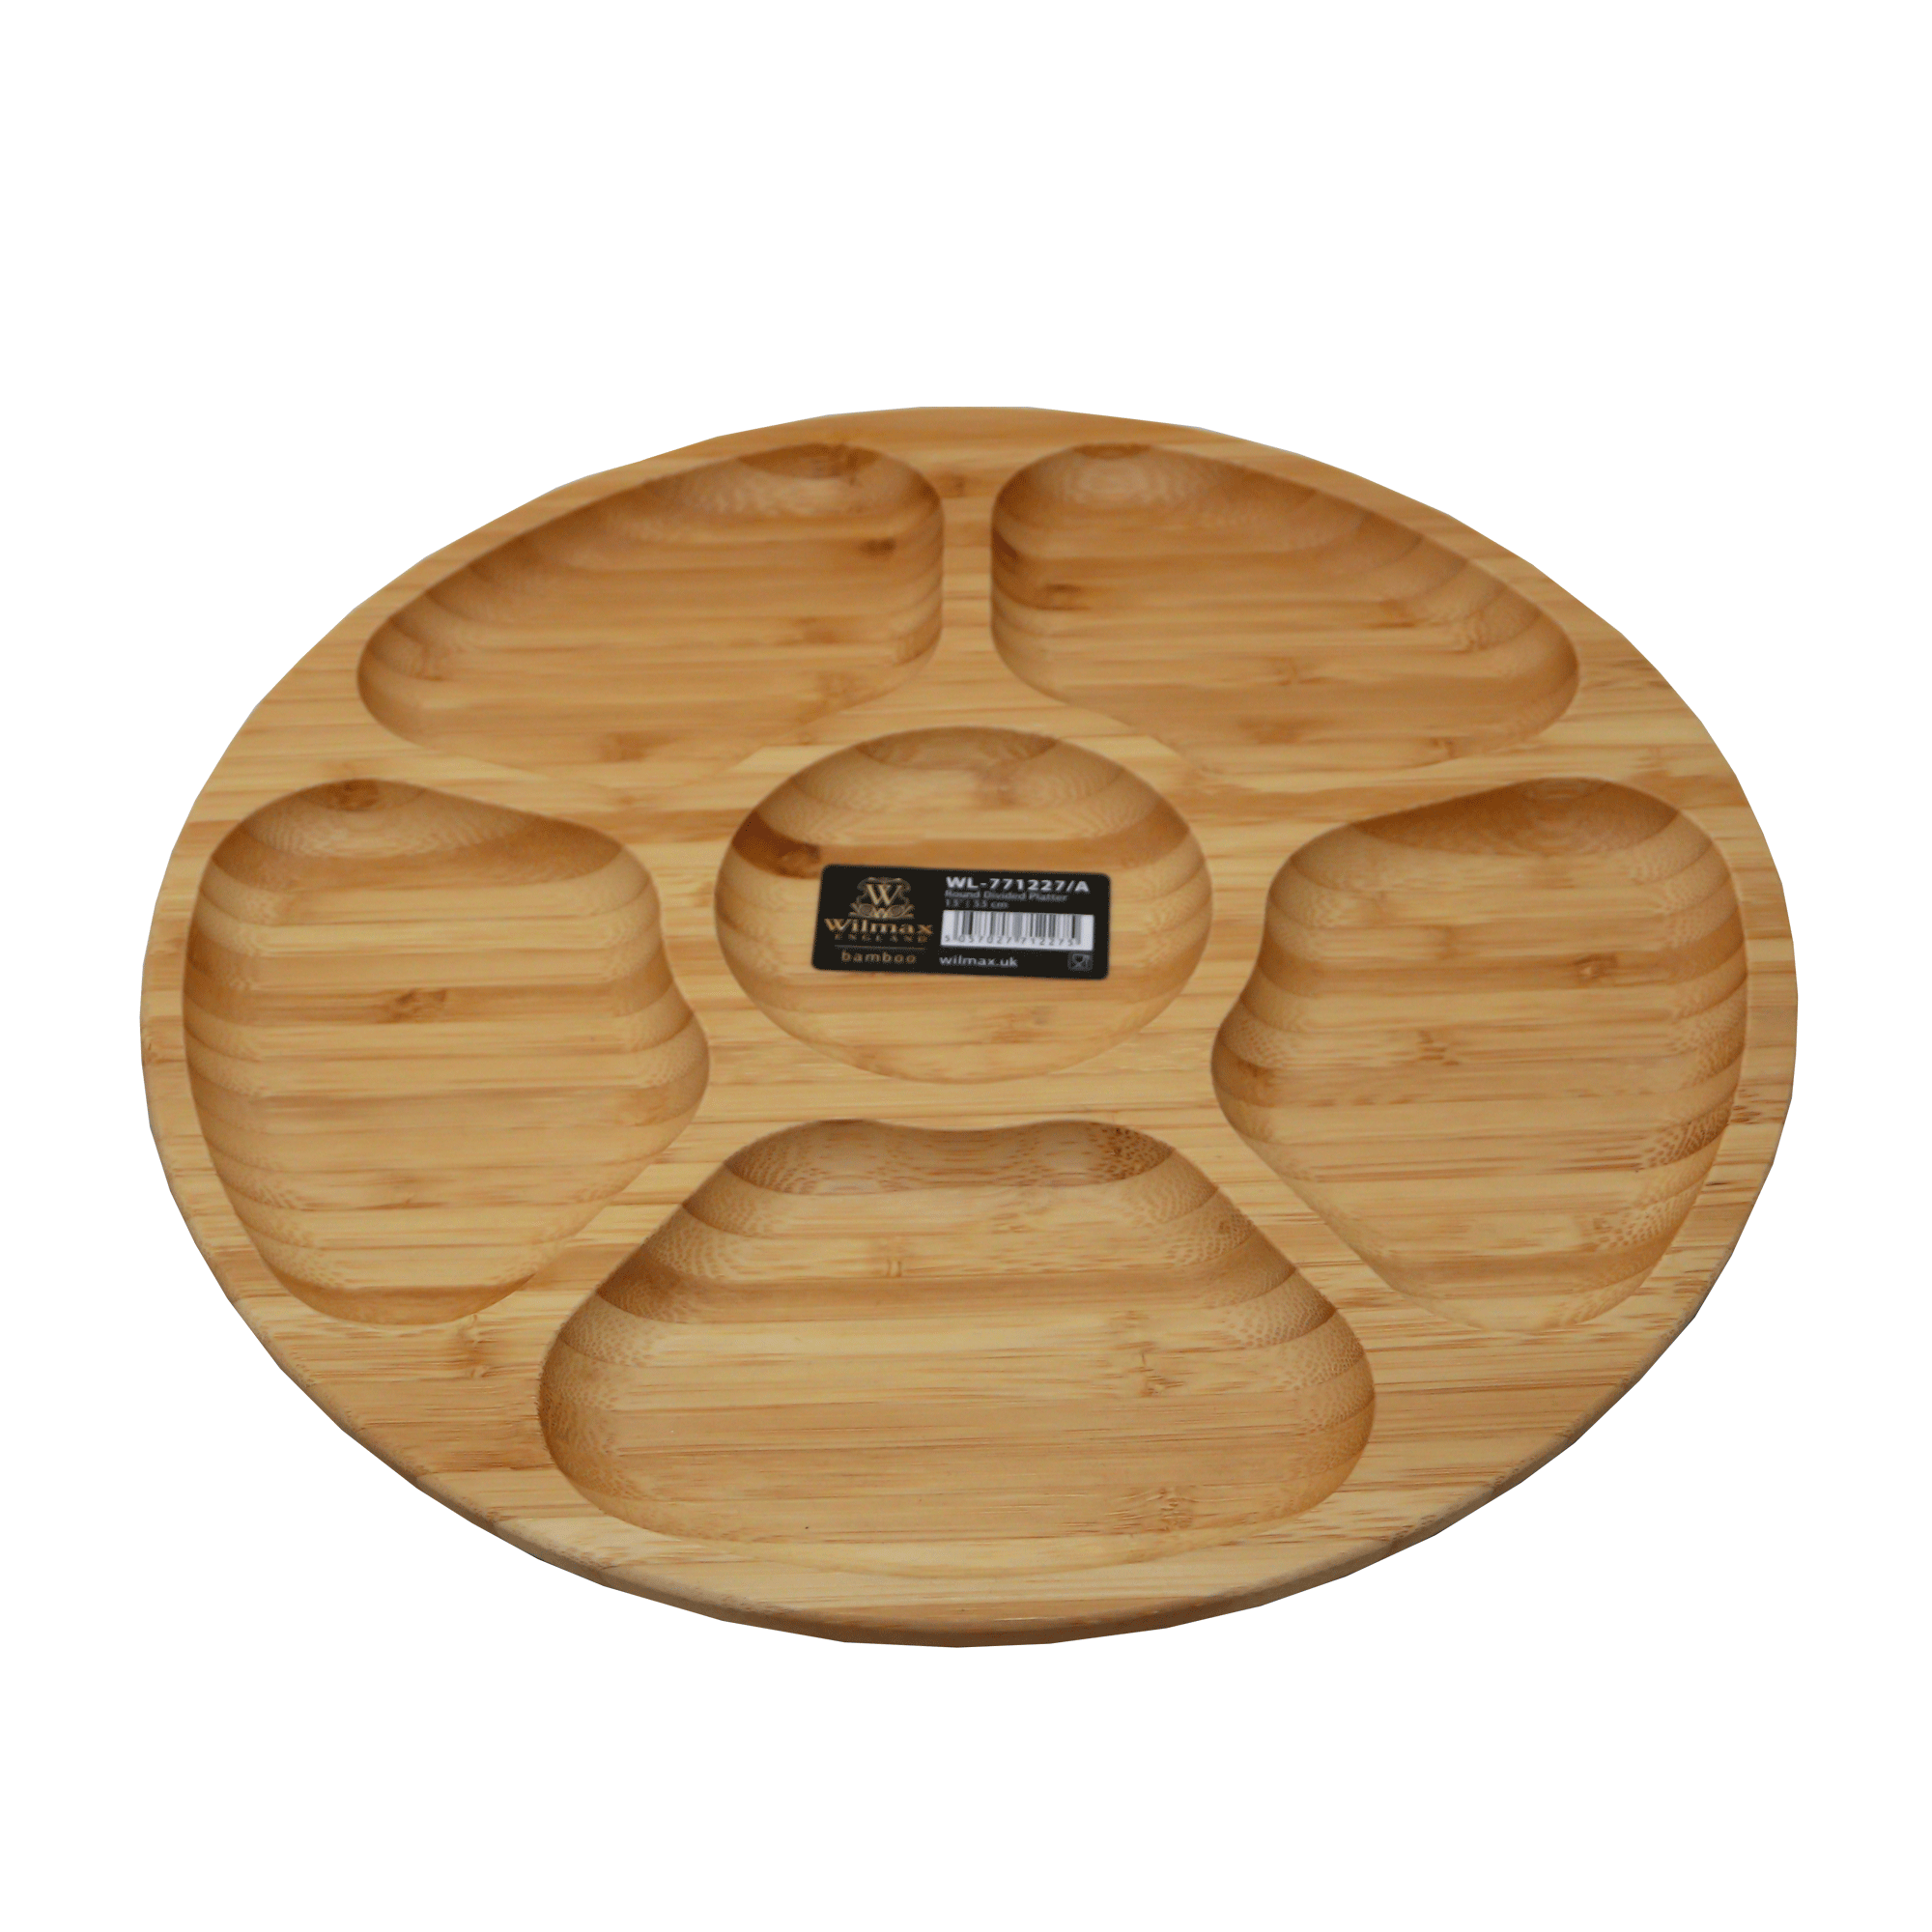 Round Divided Platter Wilmax 7118-3 771227A